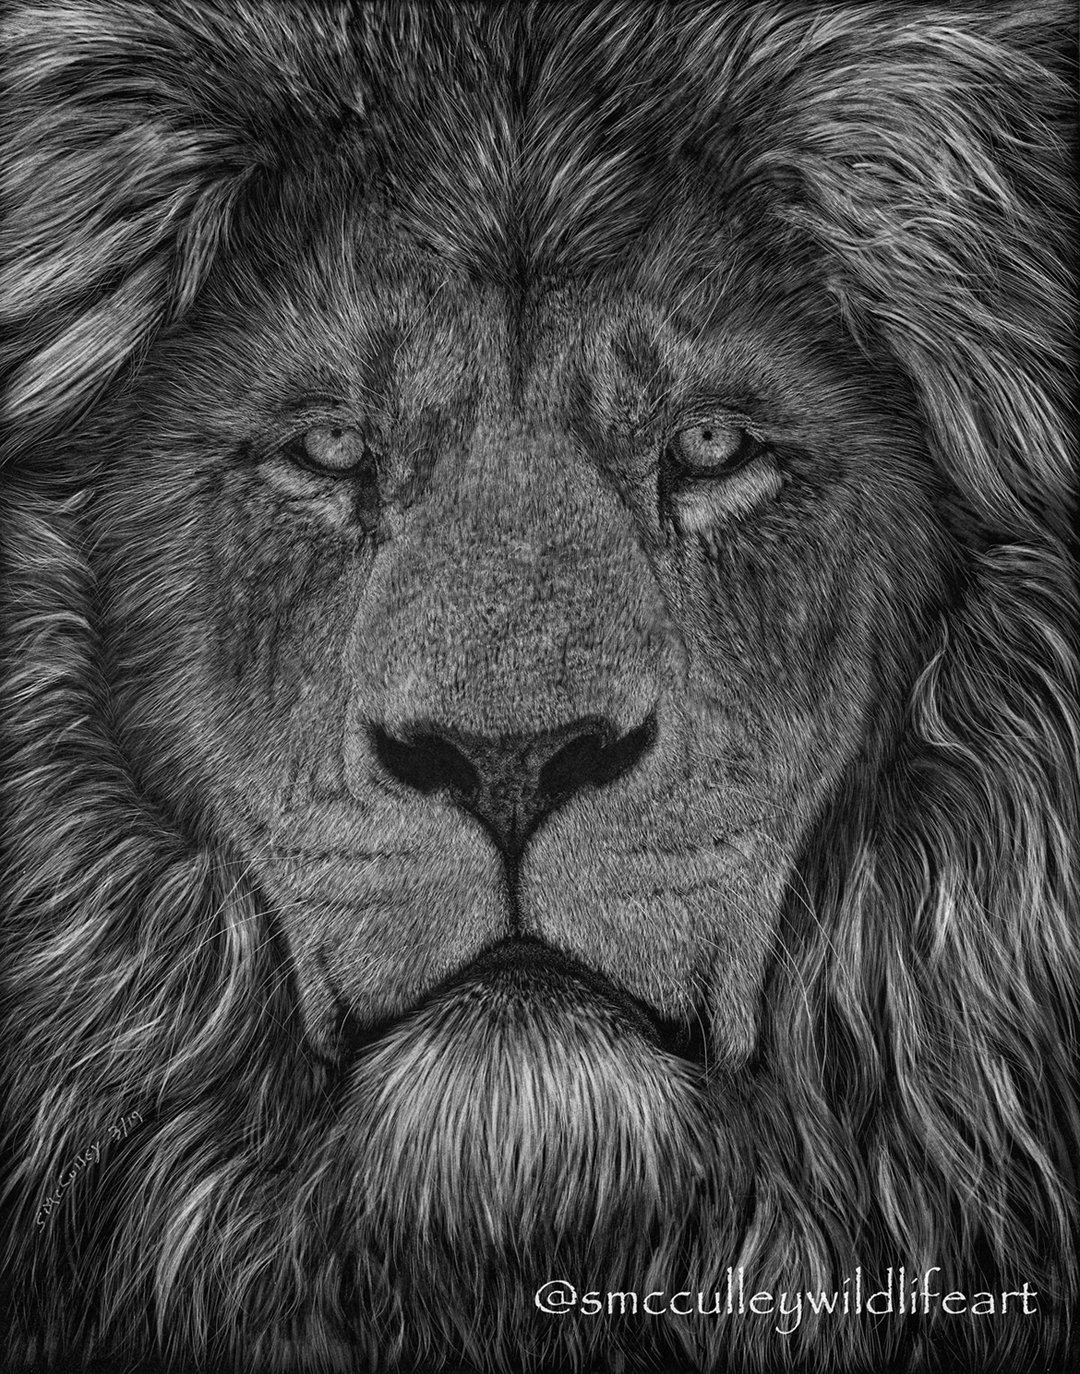 "The Look" (African Lion)